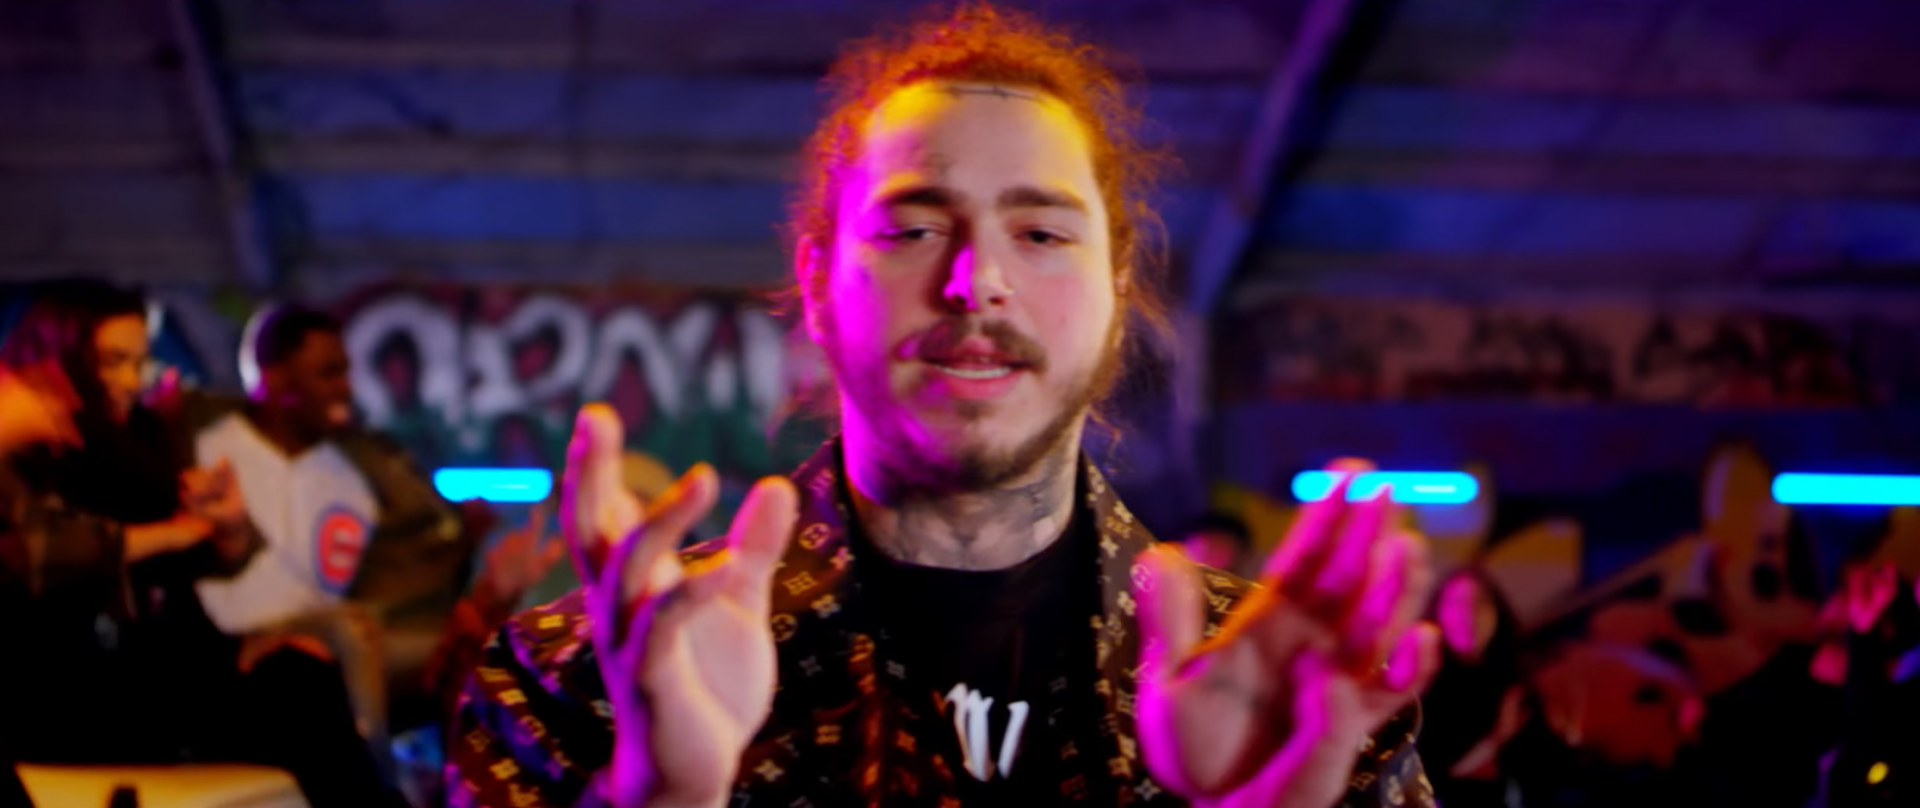 Neptune ft. Post Malone – You